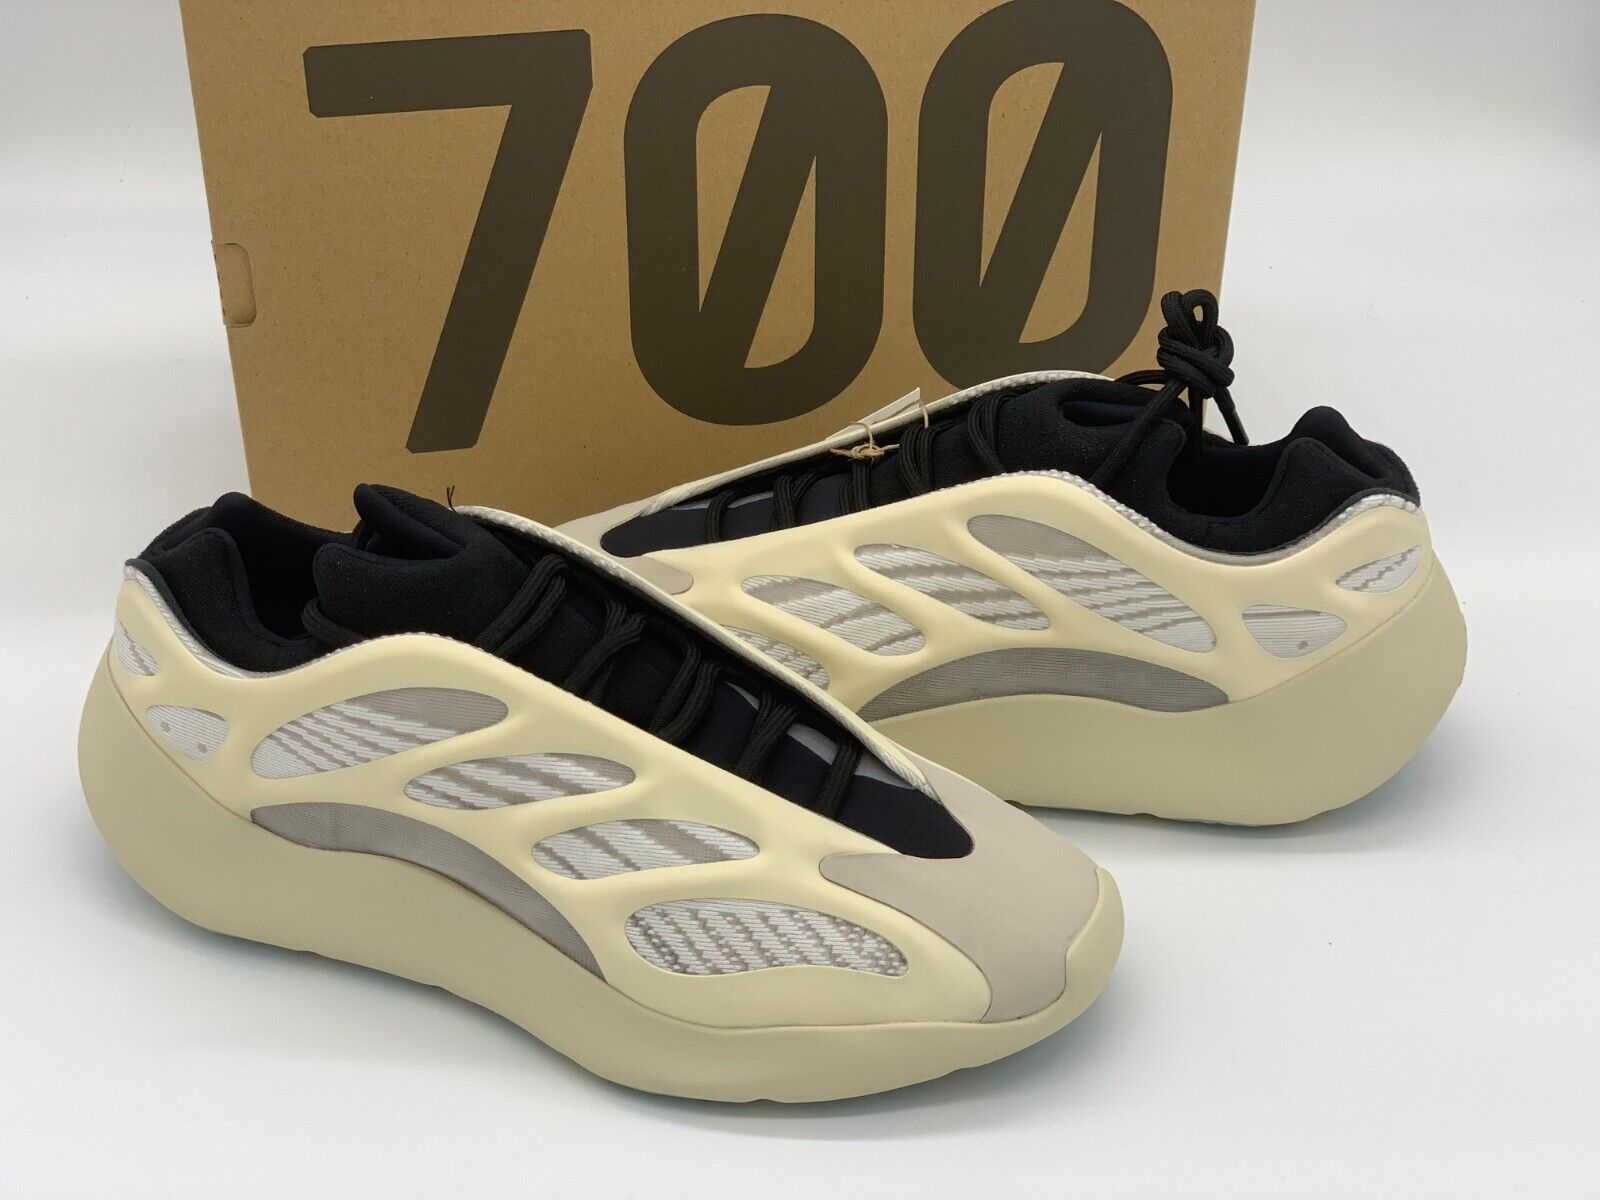 adidas Yeezy 700 V3 Azael Size 11 DEADSTOCK IN HAND/FAST SHIPPING